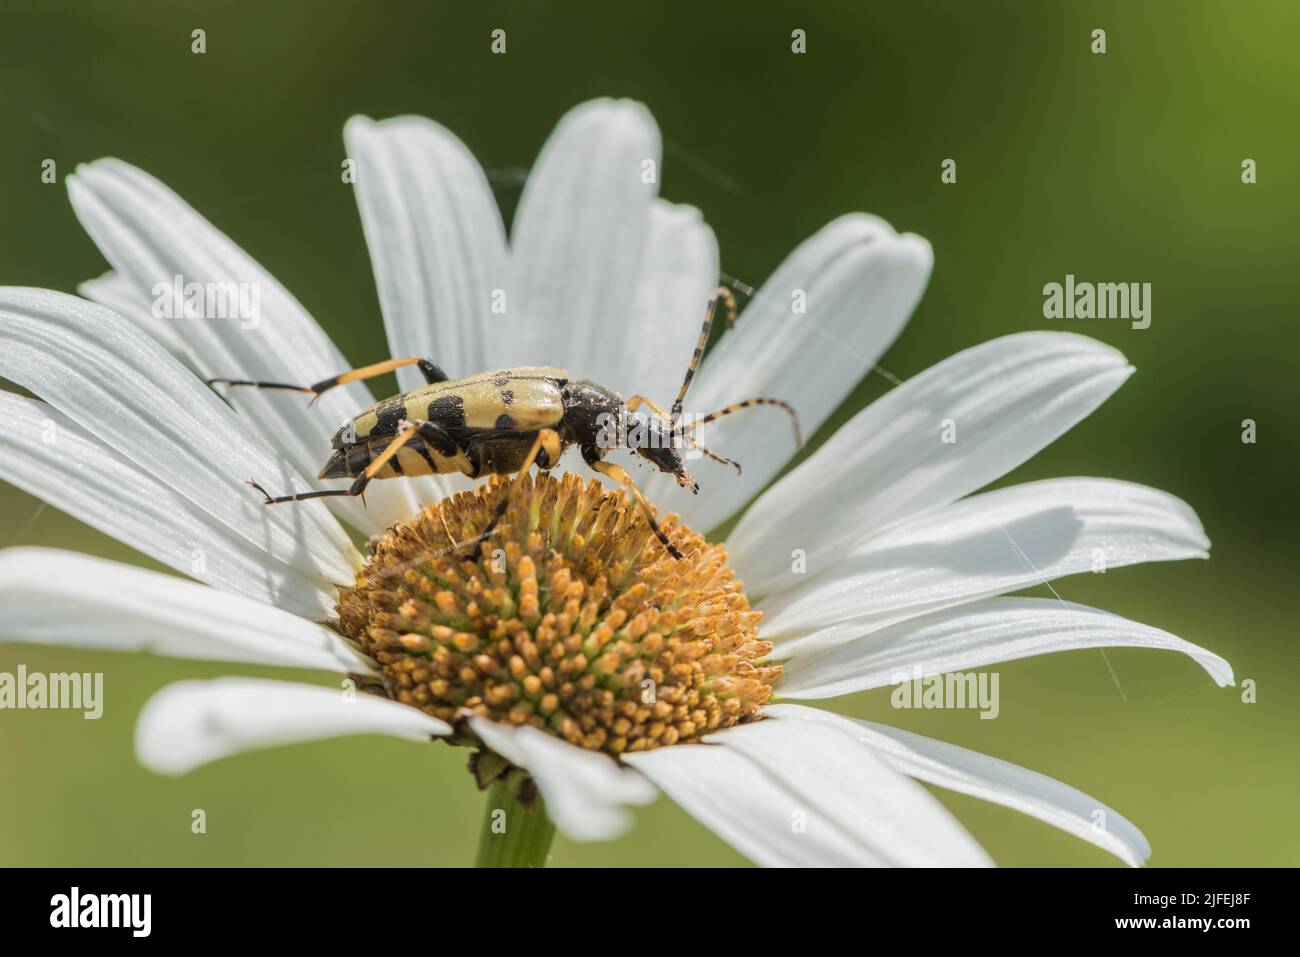 Foraging Spotted Longhorn beetle (Rutpela maculata) Stock Photo